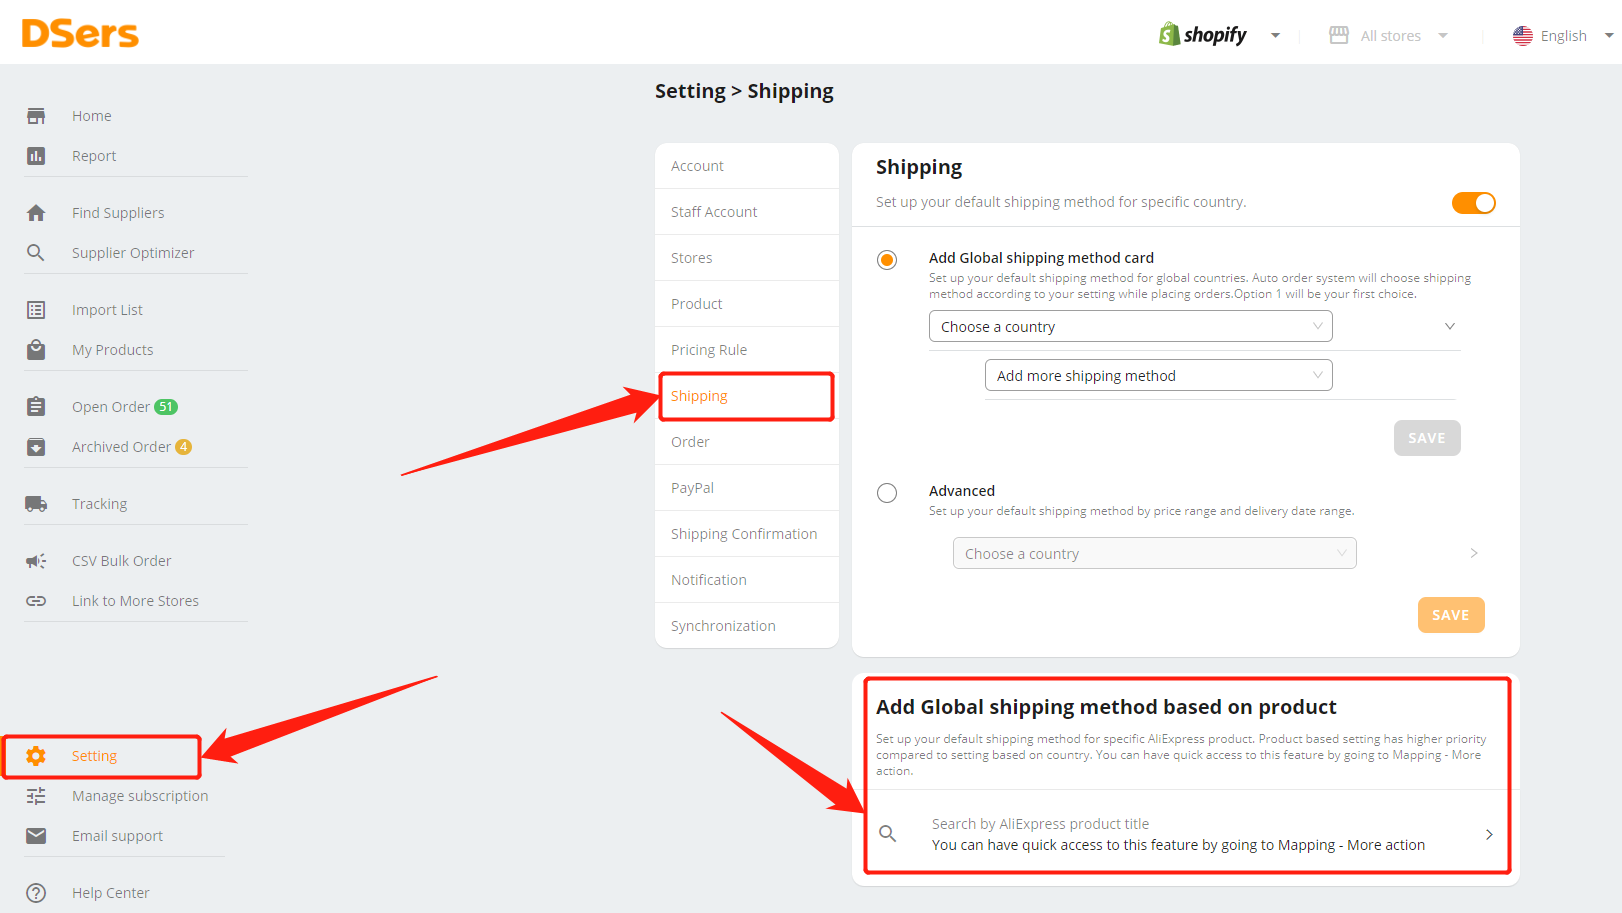 Set shipping method for specific product - Add Global shipping method based on product - DSers